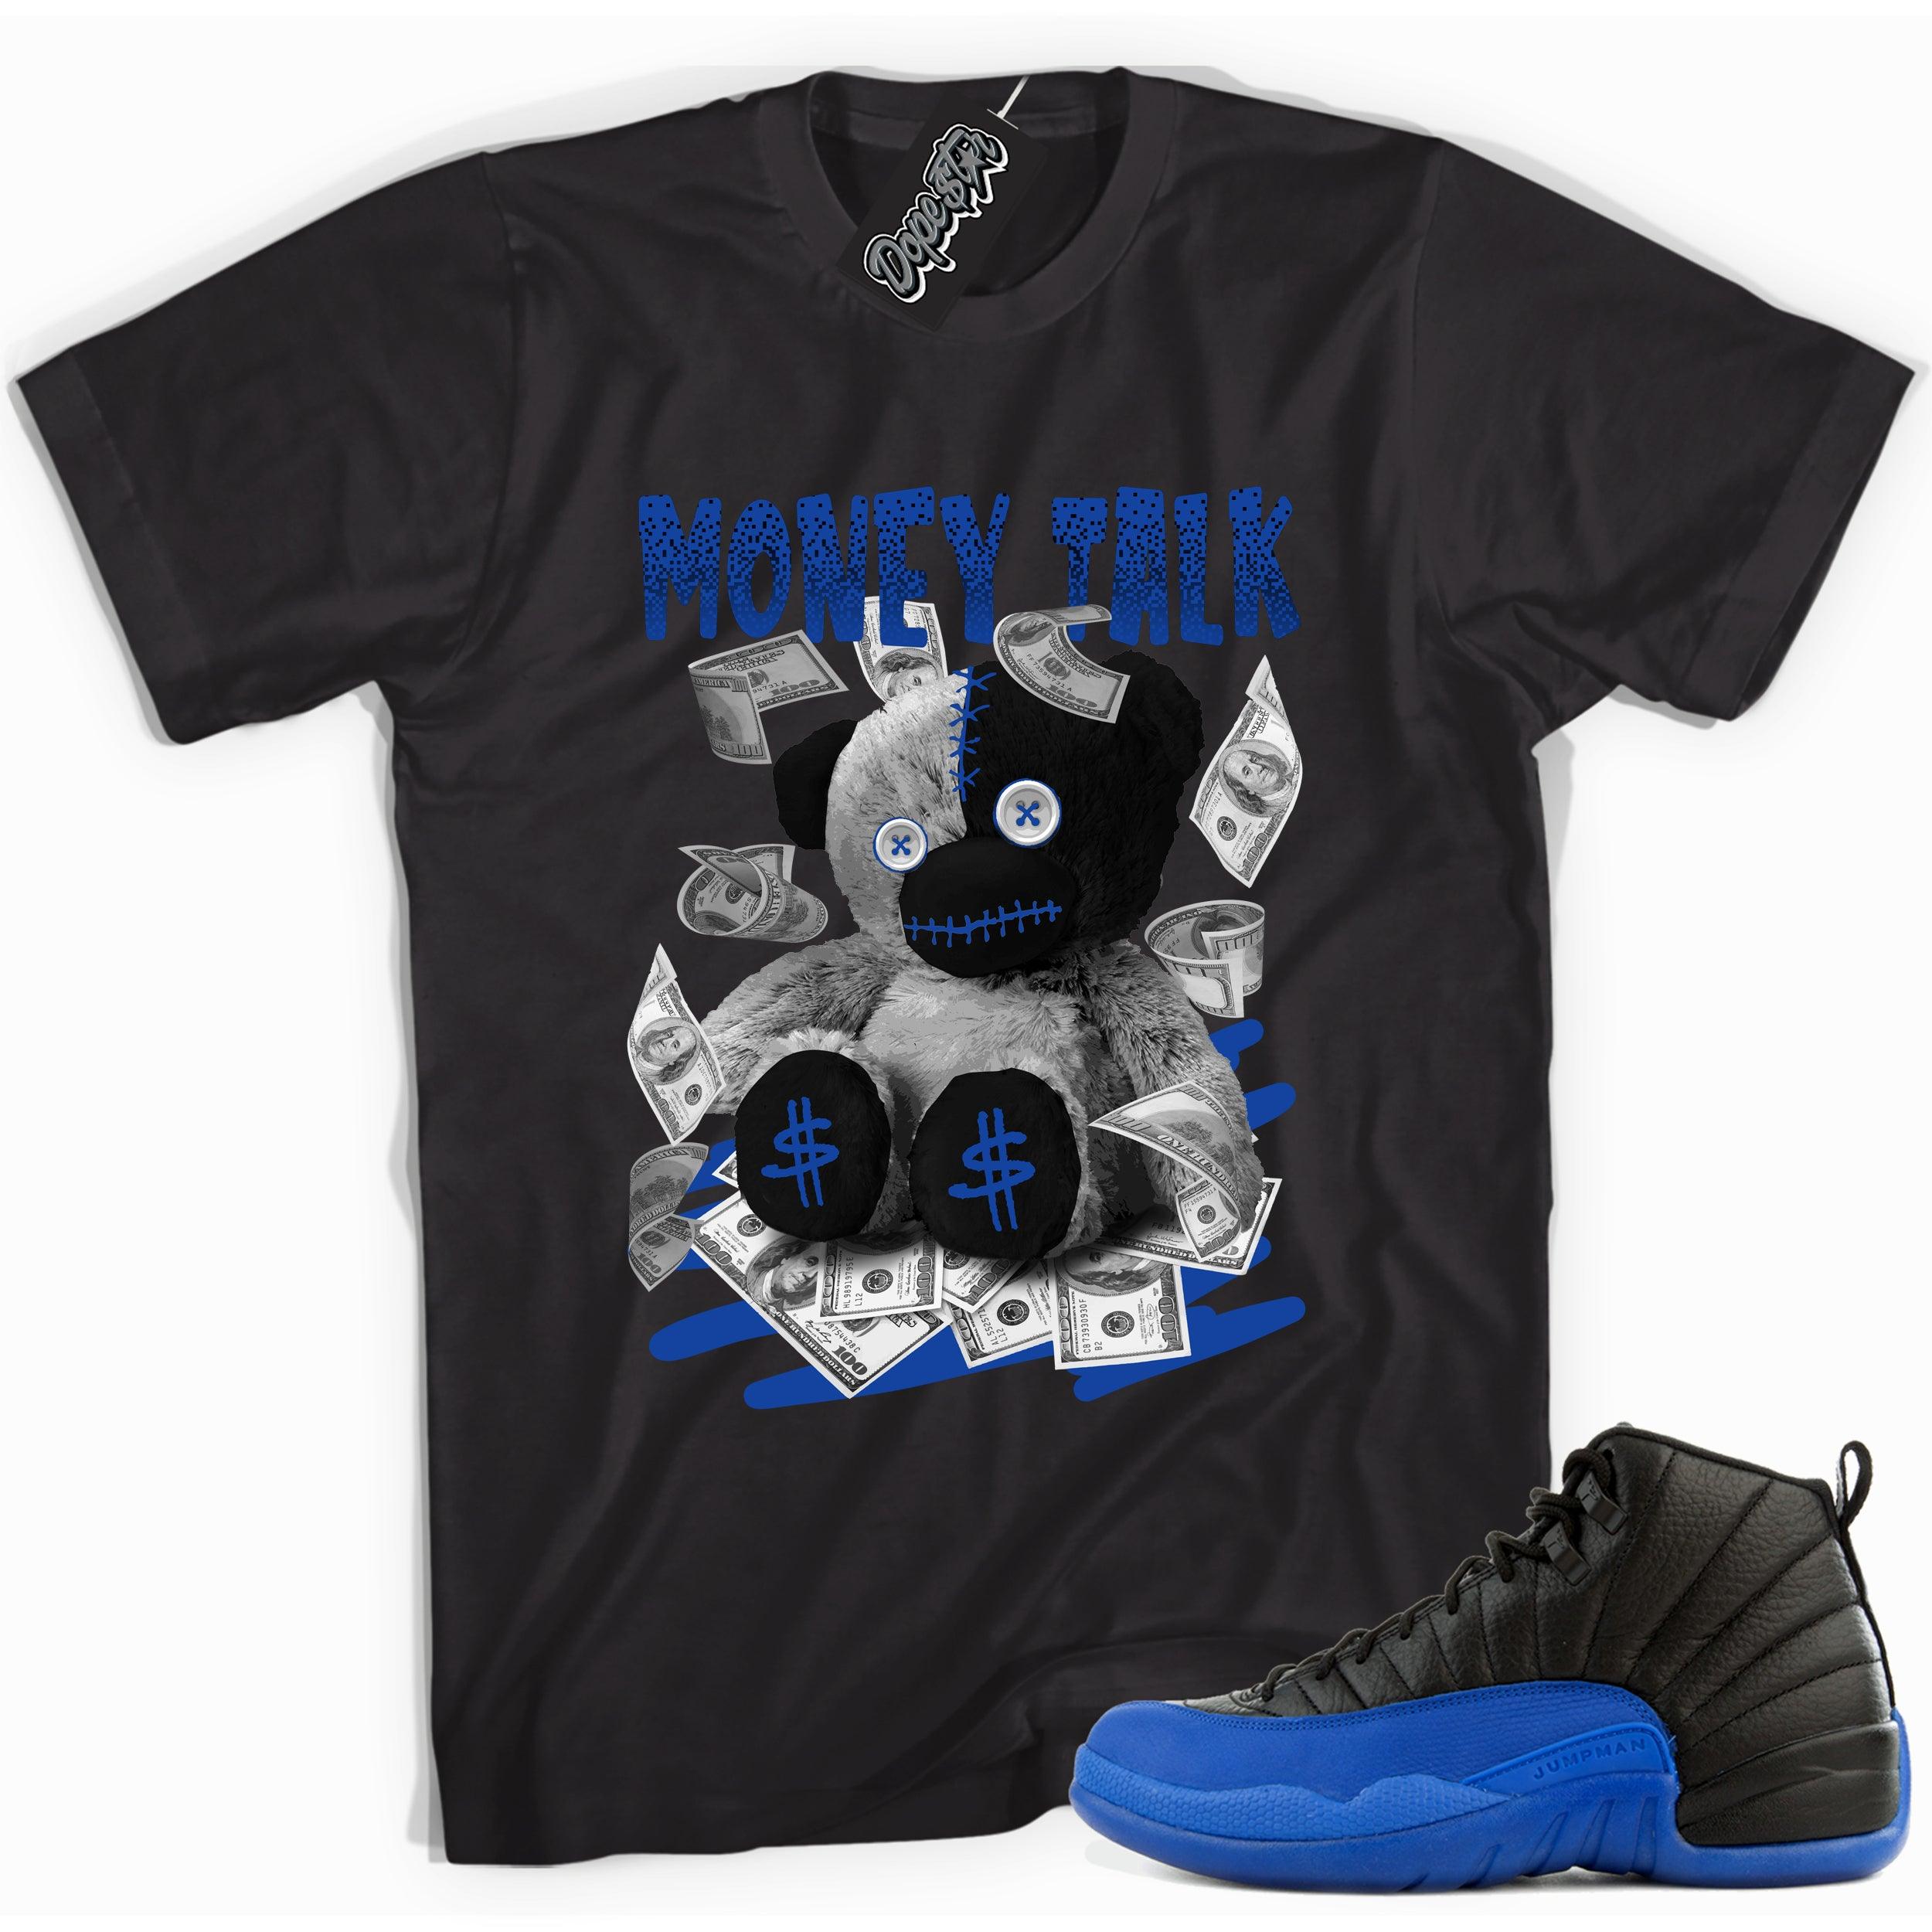 Cool black graphic tee with 'money talk bear' print, that perfectly matches  Air Jordan 12 Retro Black Game Royal sneakers.